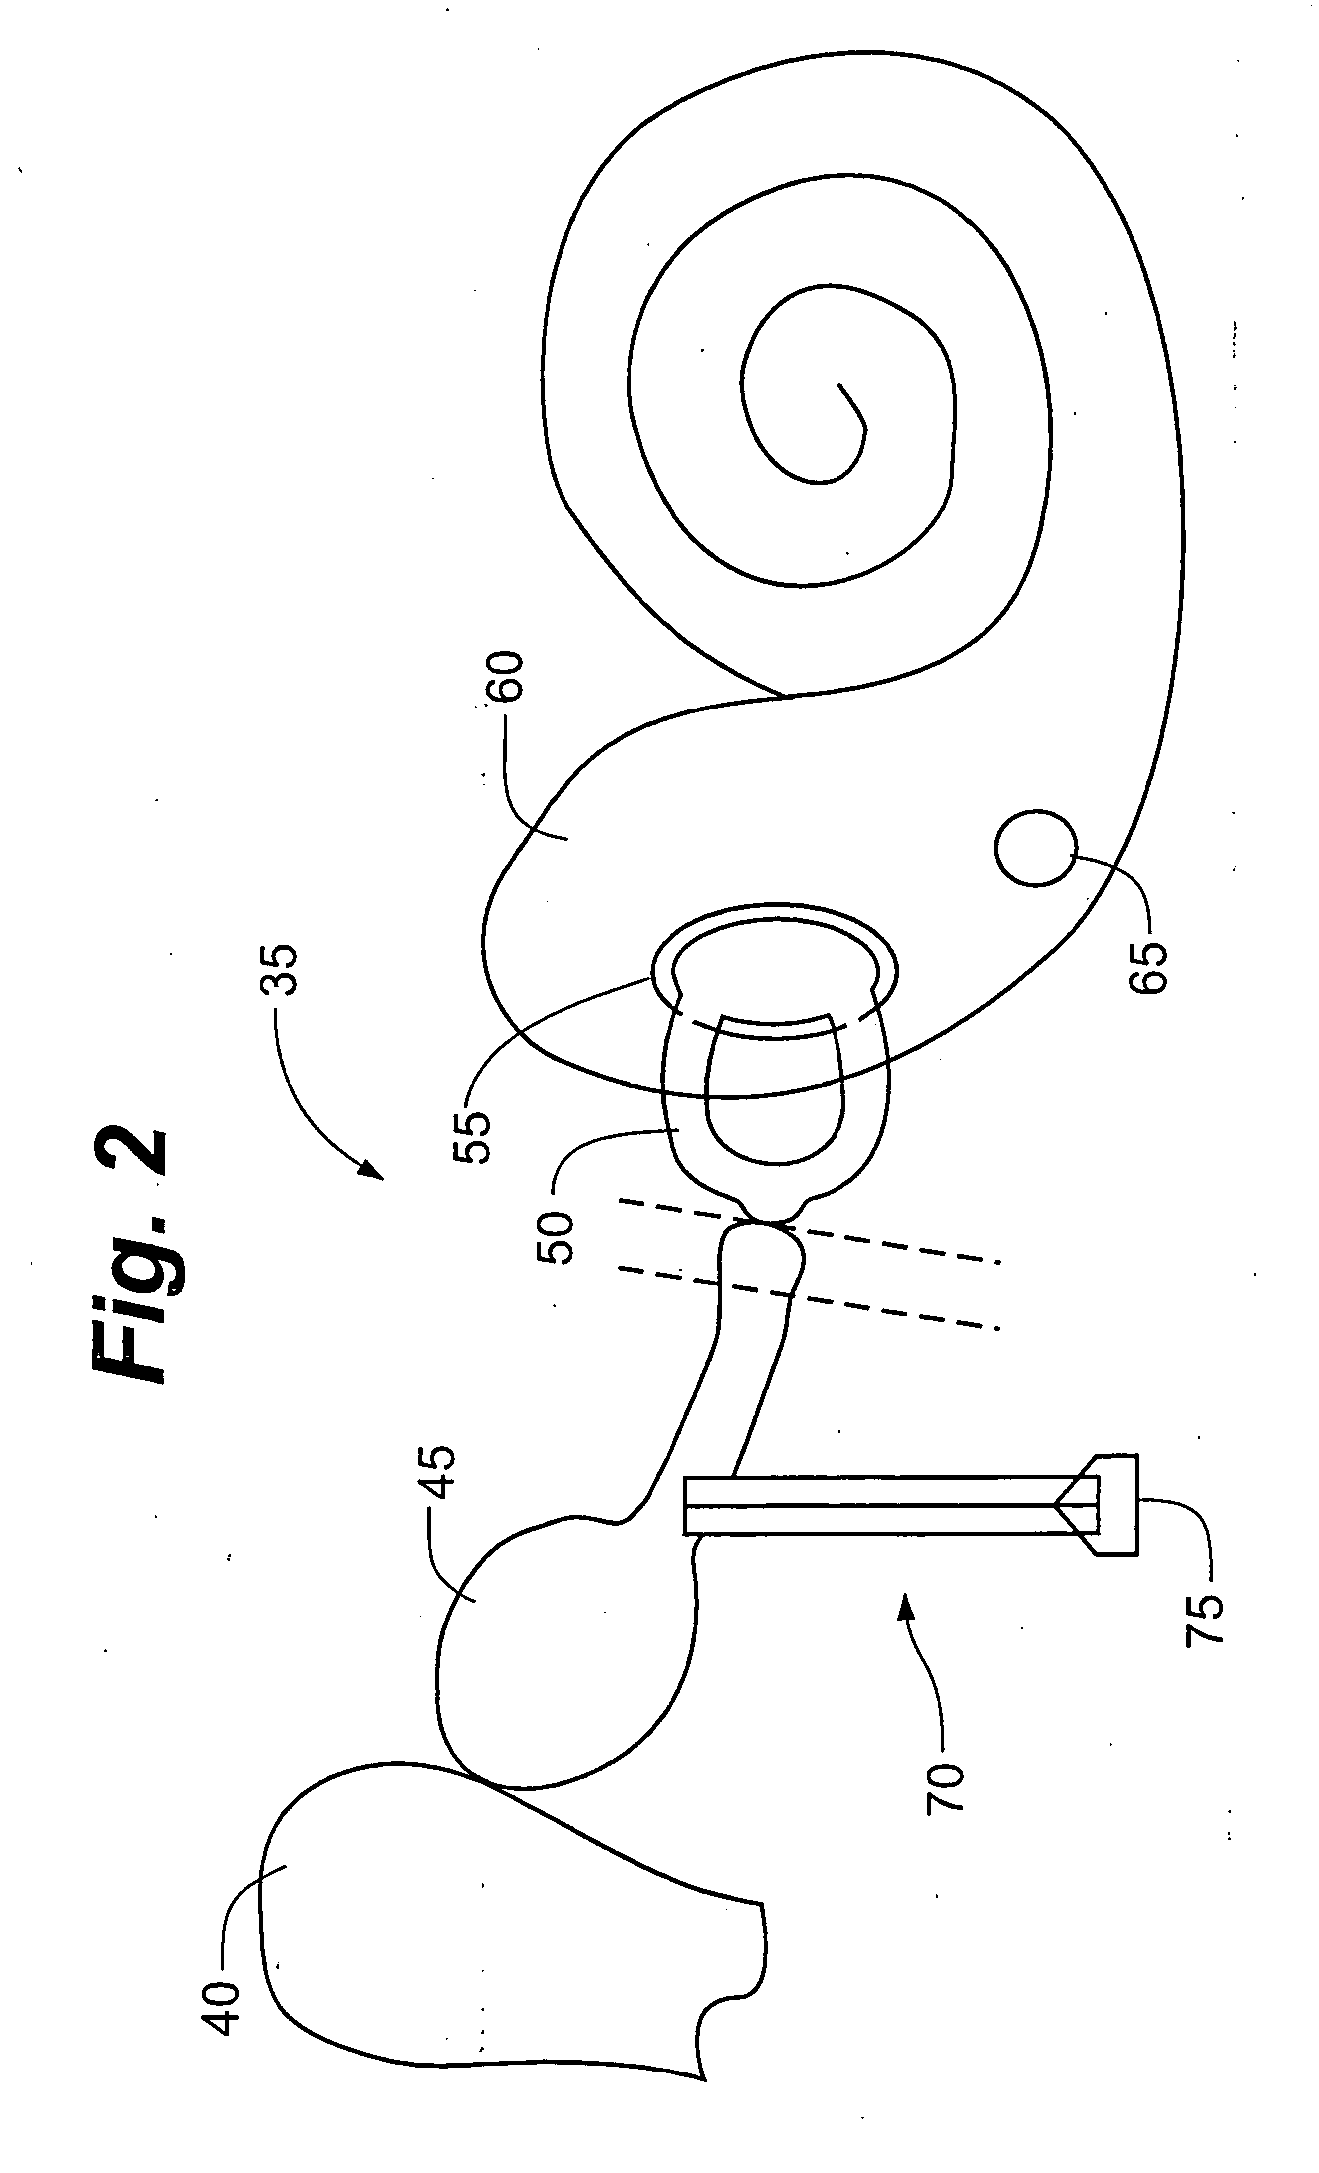 Method and apparatus for minimally invasive placement of sensing and driver assemblies to improve hearing loss